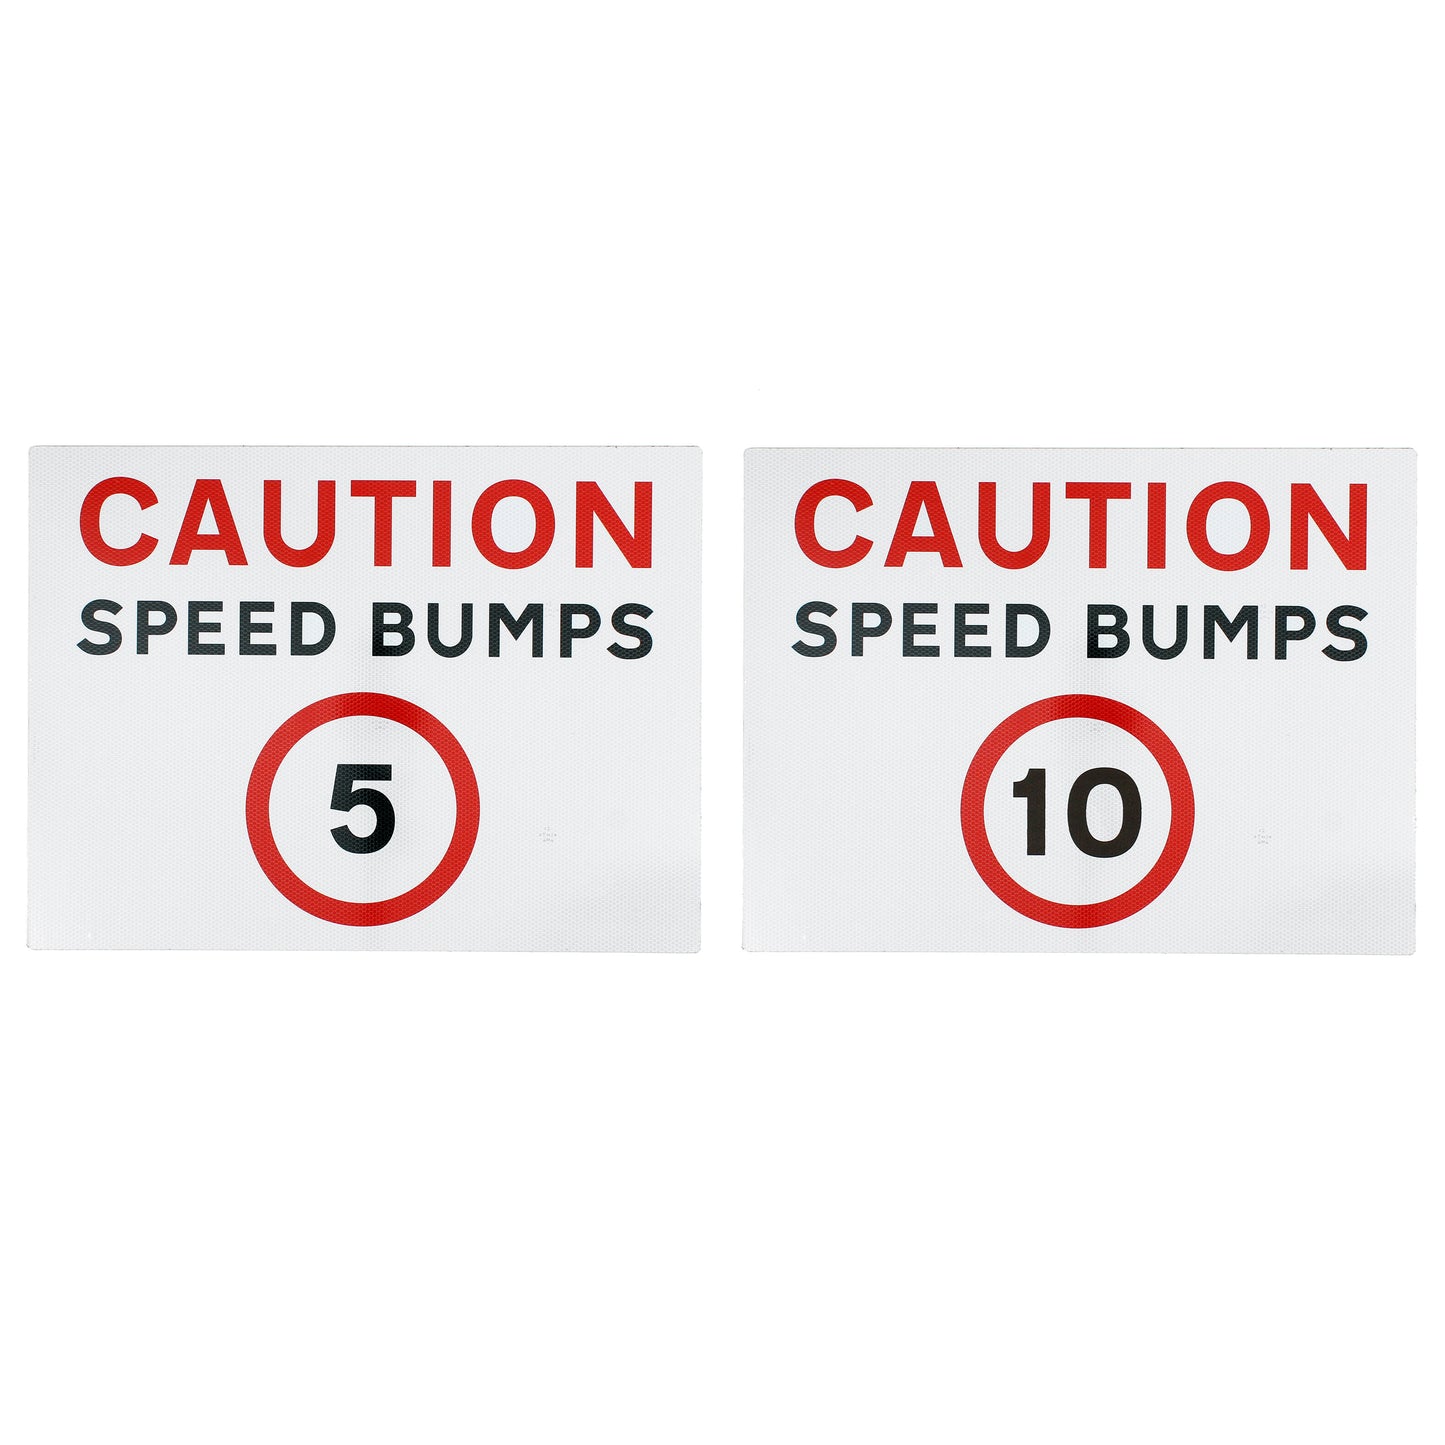 Caution Speed Bumps Sign - 5mph / 10mph - Wall Mount